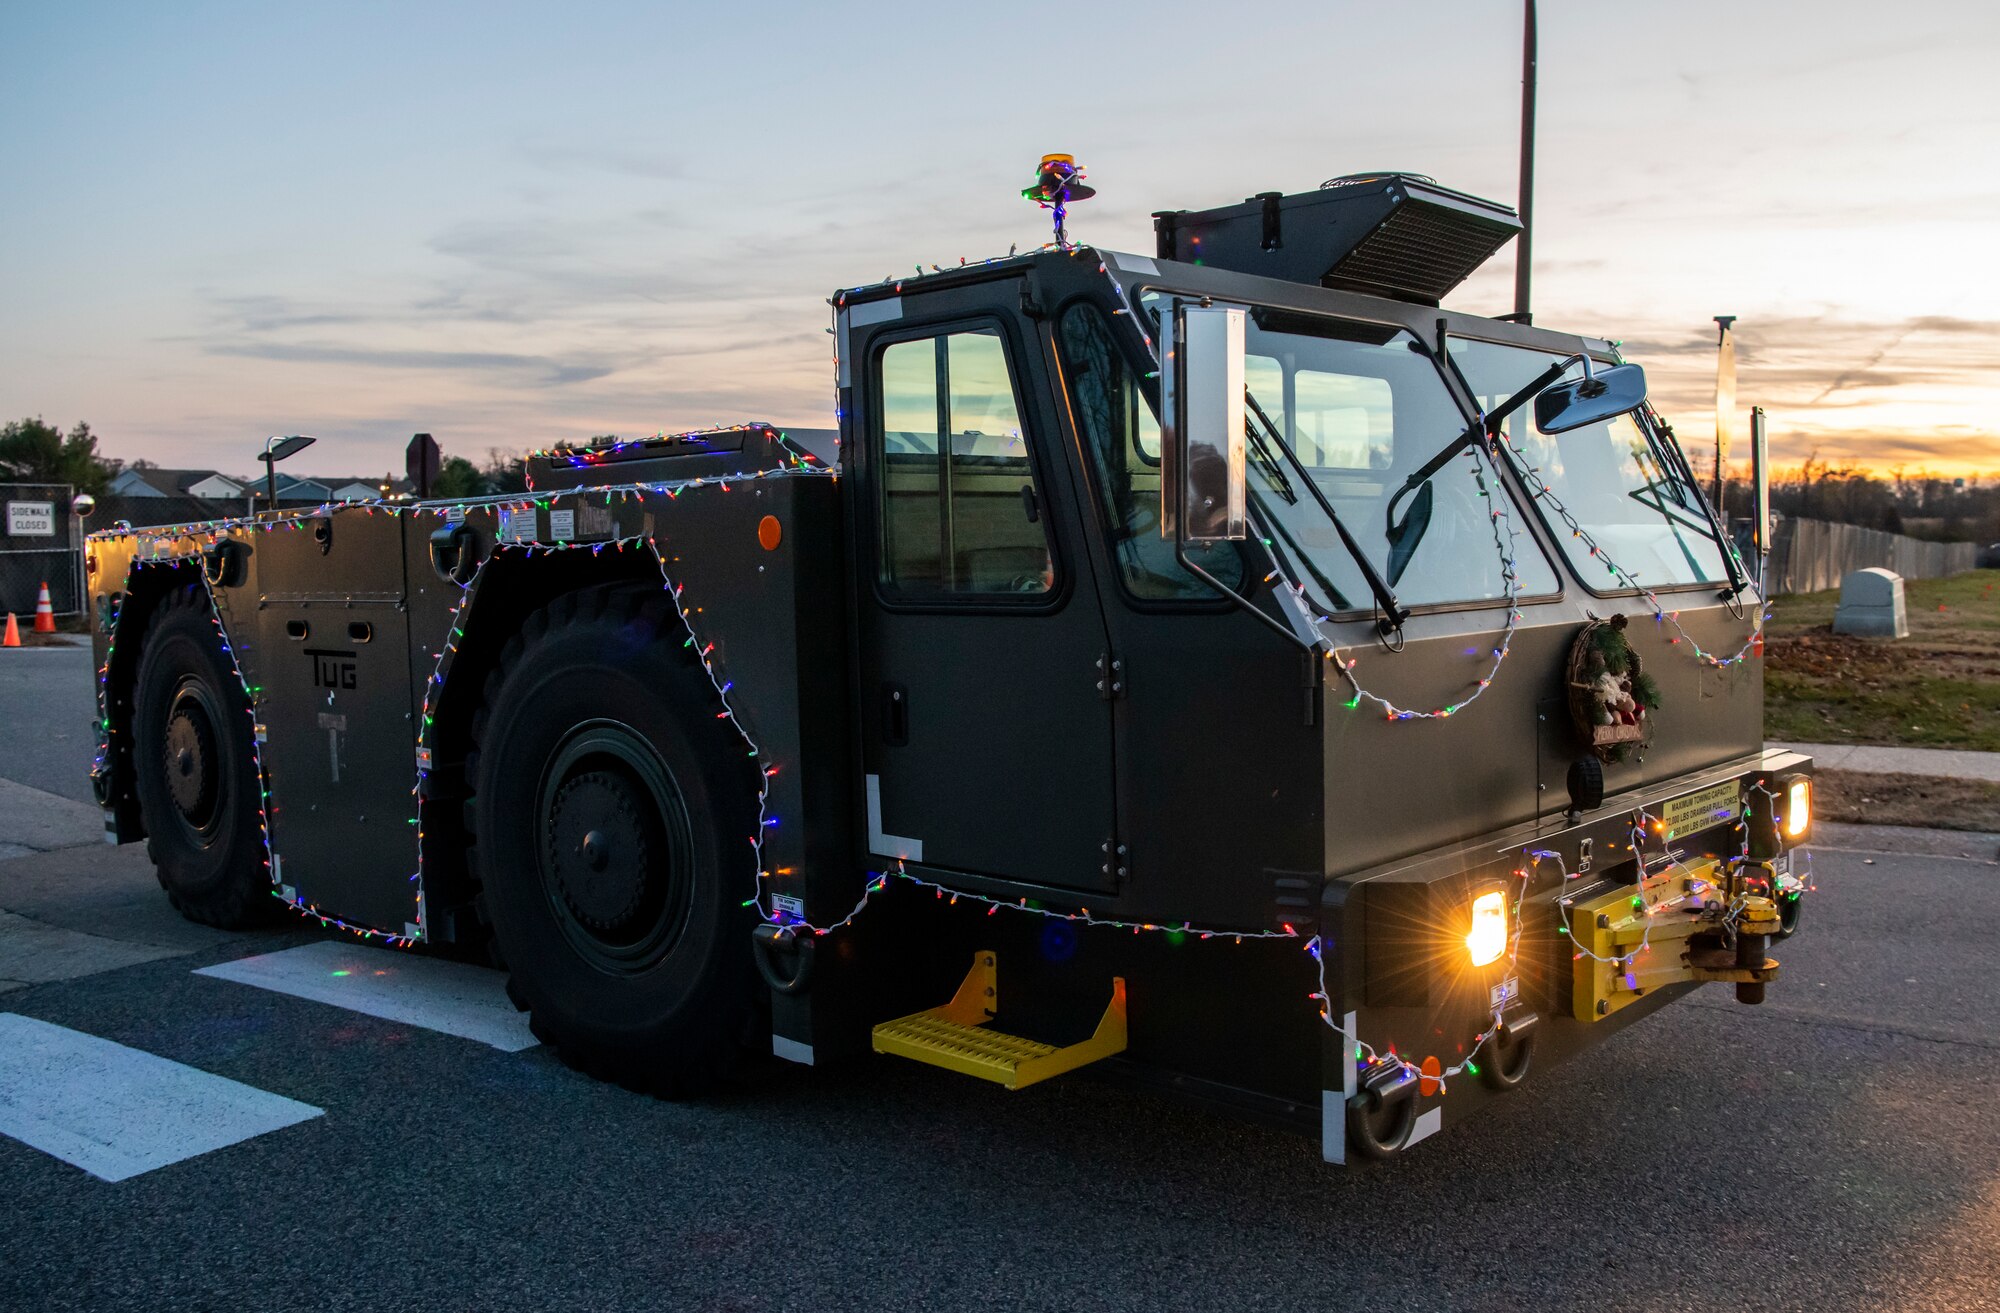 Airmen from Team Dover participate in the 2019 Dover Air Force Base Holiday Parade Dec. 3, 2019, at Dover Air Force Base, Del. A variety of military and first responder vehicles were decorated for the event. (U.S. Air Force photo by Senior Airman Christopher Quail)